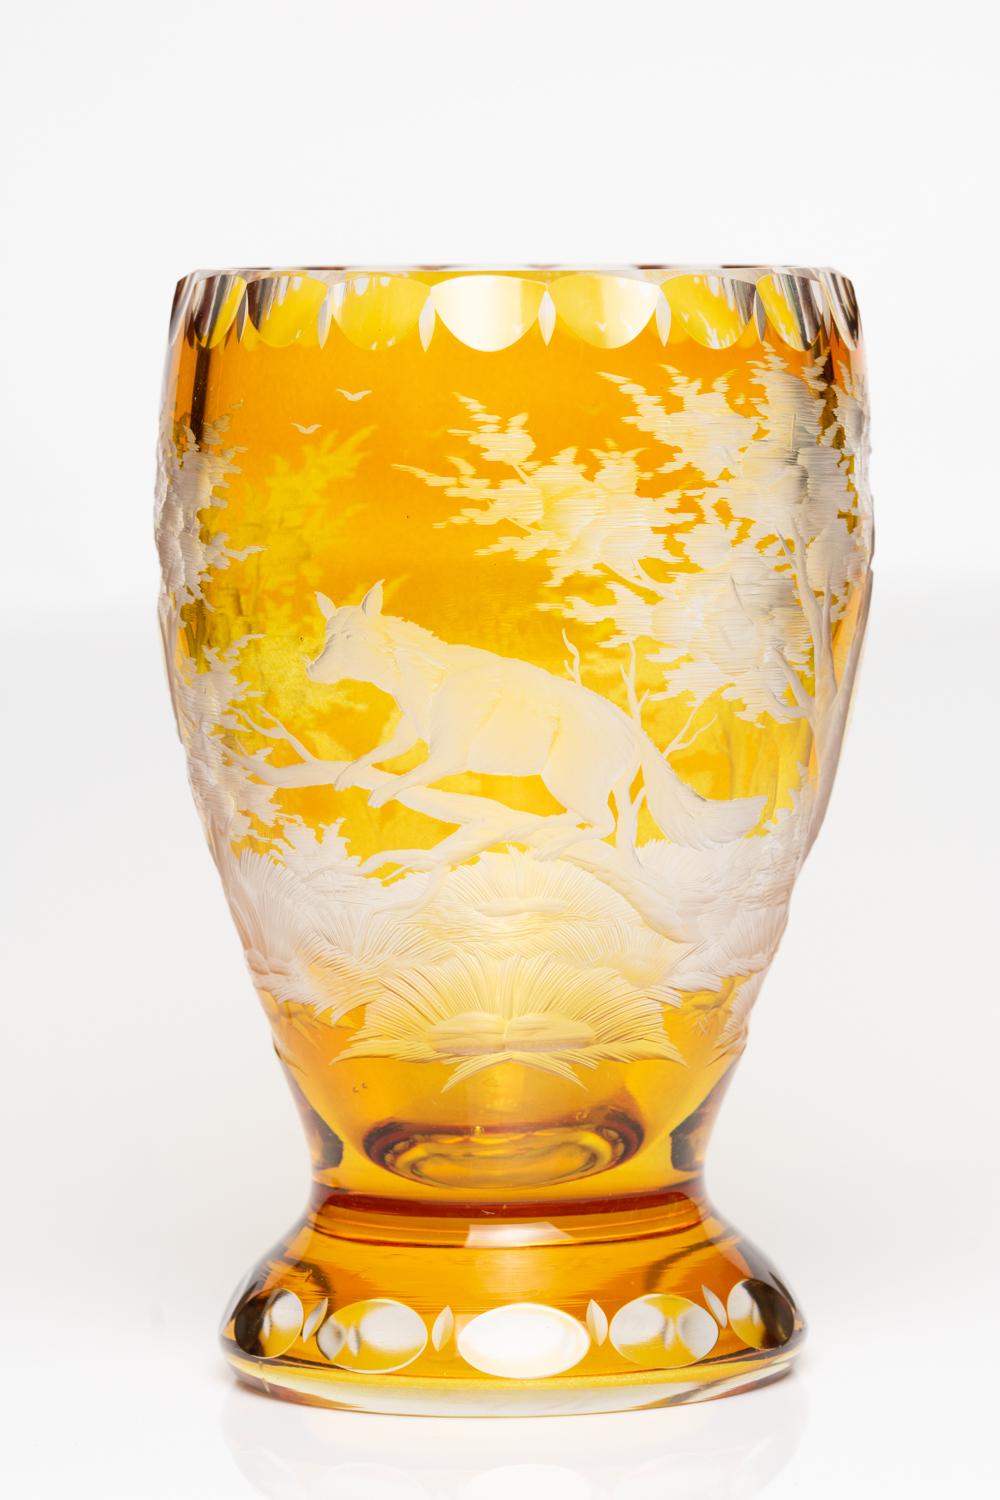 An impressive antique Bohemian Stained Glass Goblet/Vase depicts a fox in the centre on a tree branch among vegetation and spreading trees. This piece is engraved with beautiful and high-quality detail, especially the fox's body and tree's bark. The